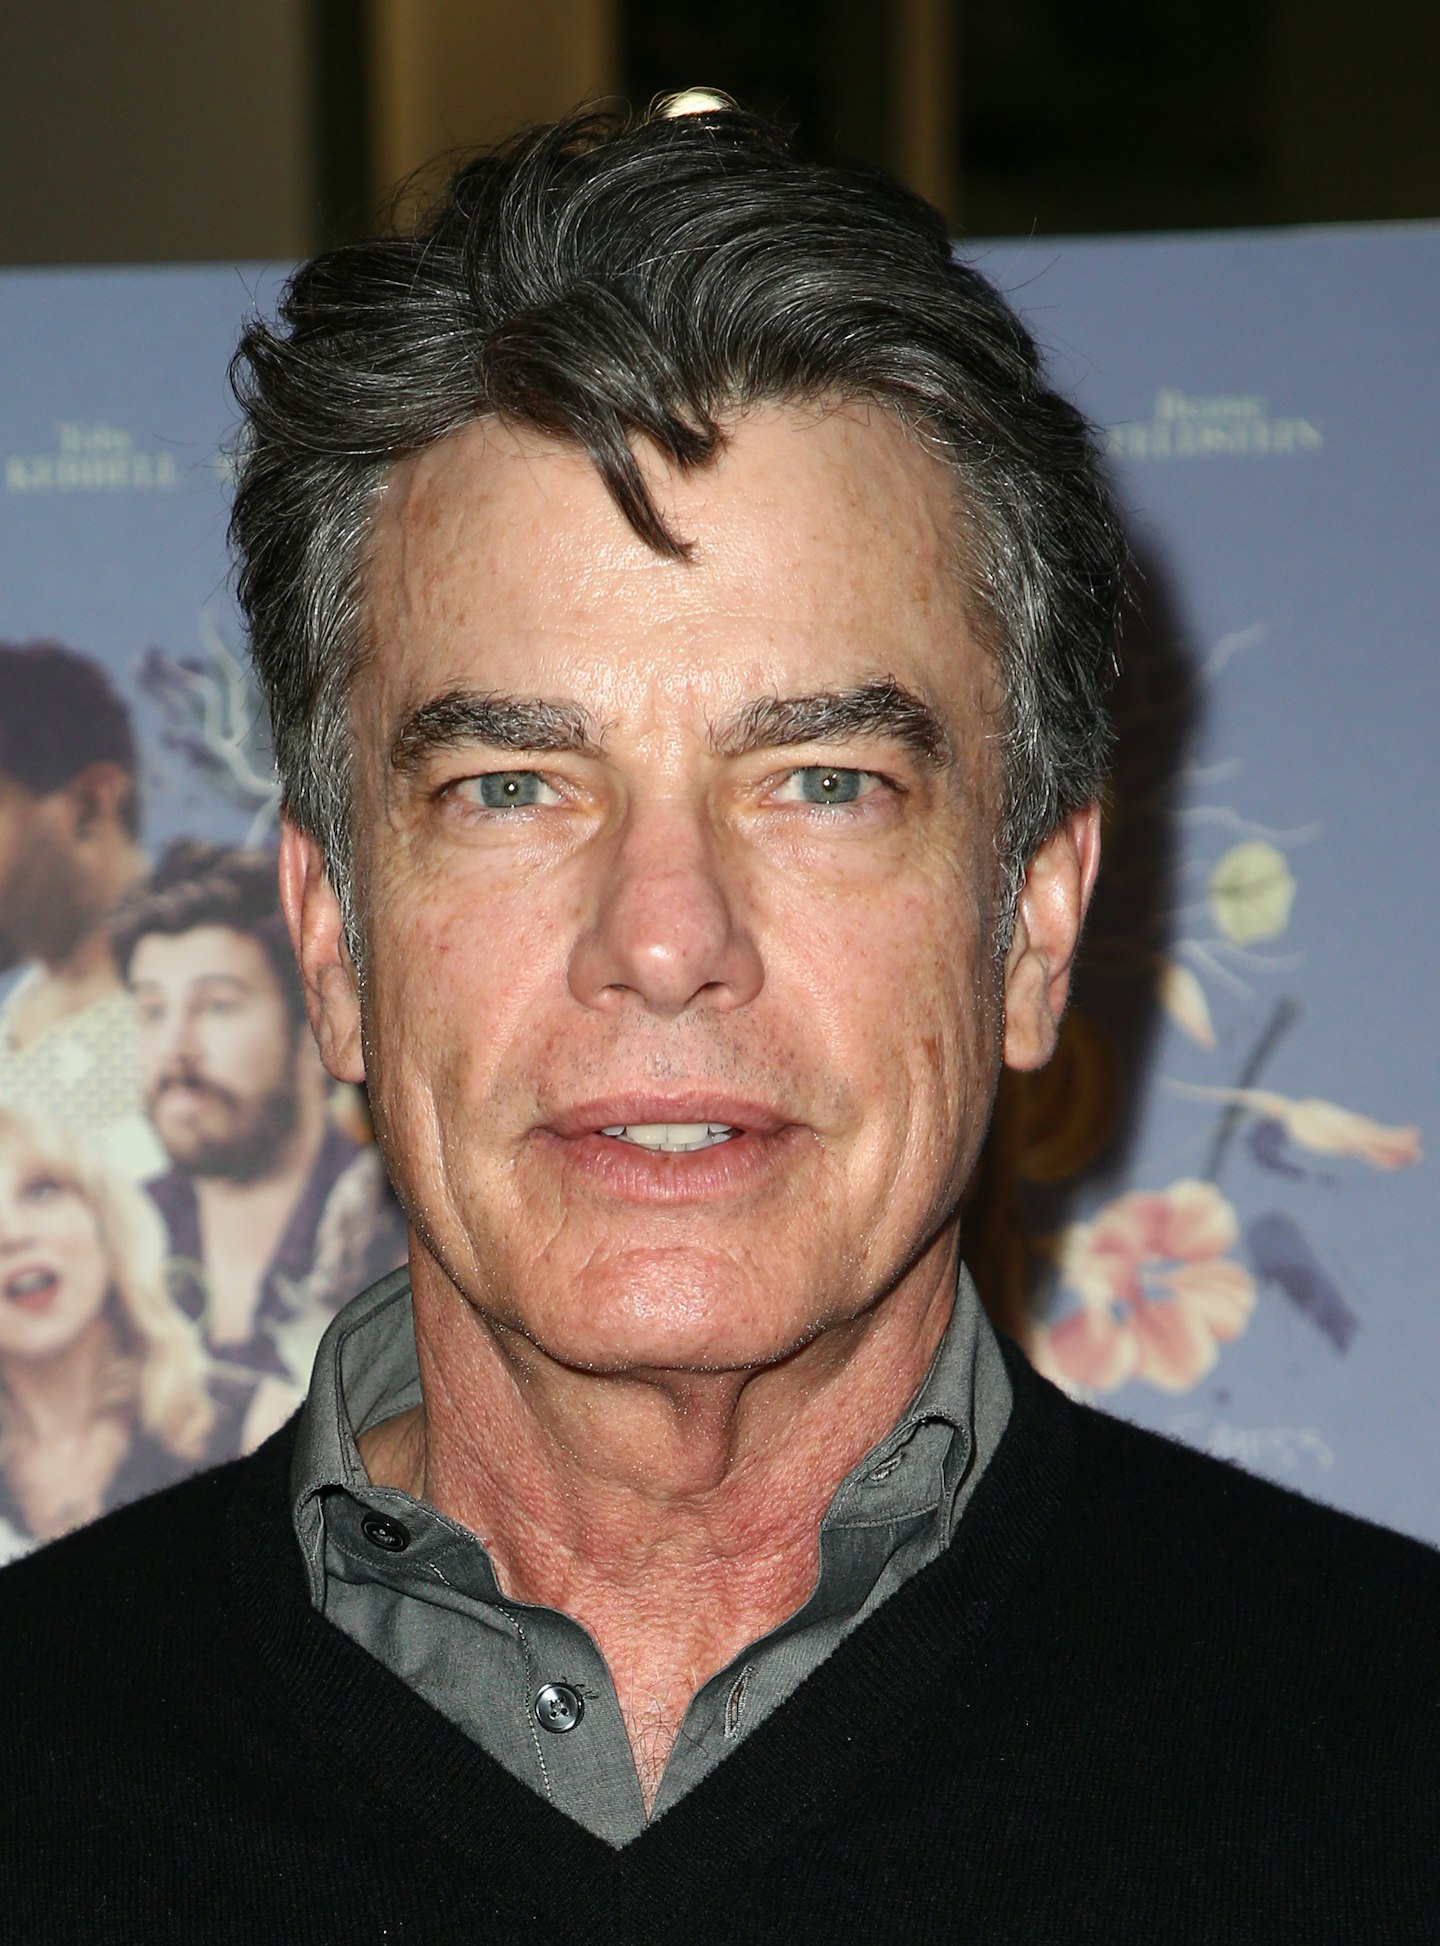 Peter Gallagher (Sandy Cohen) now